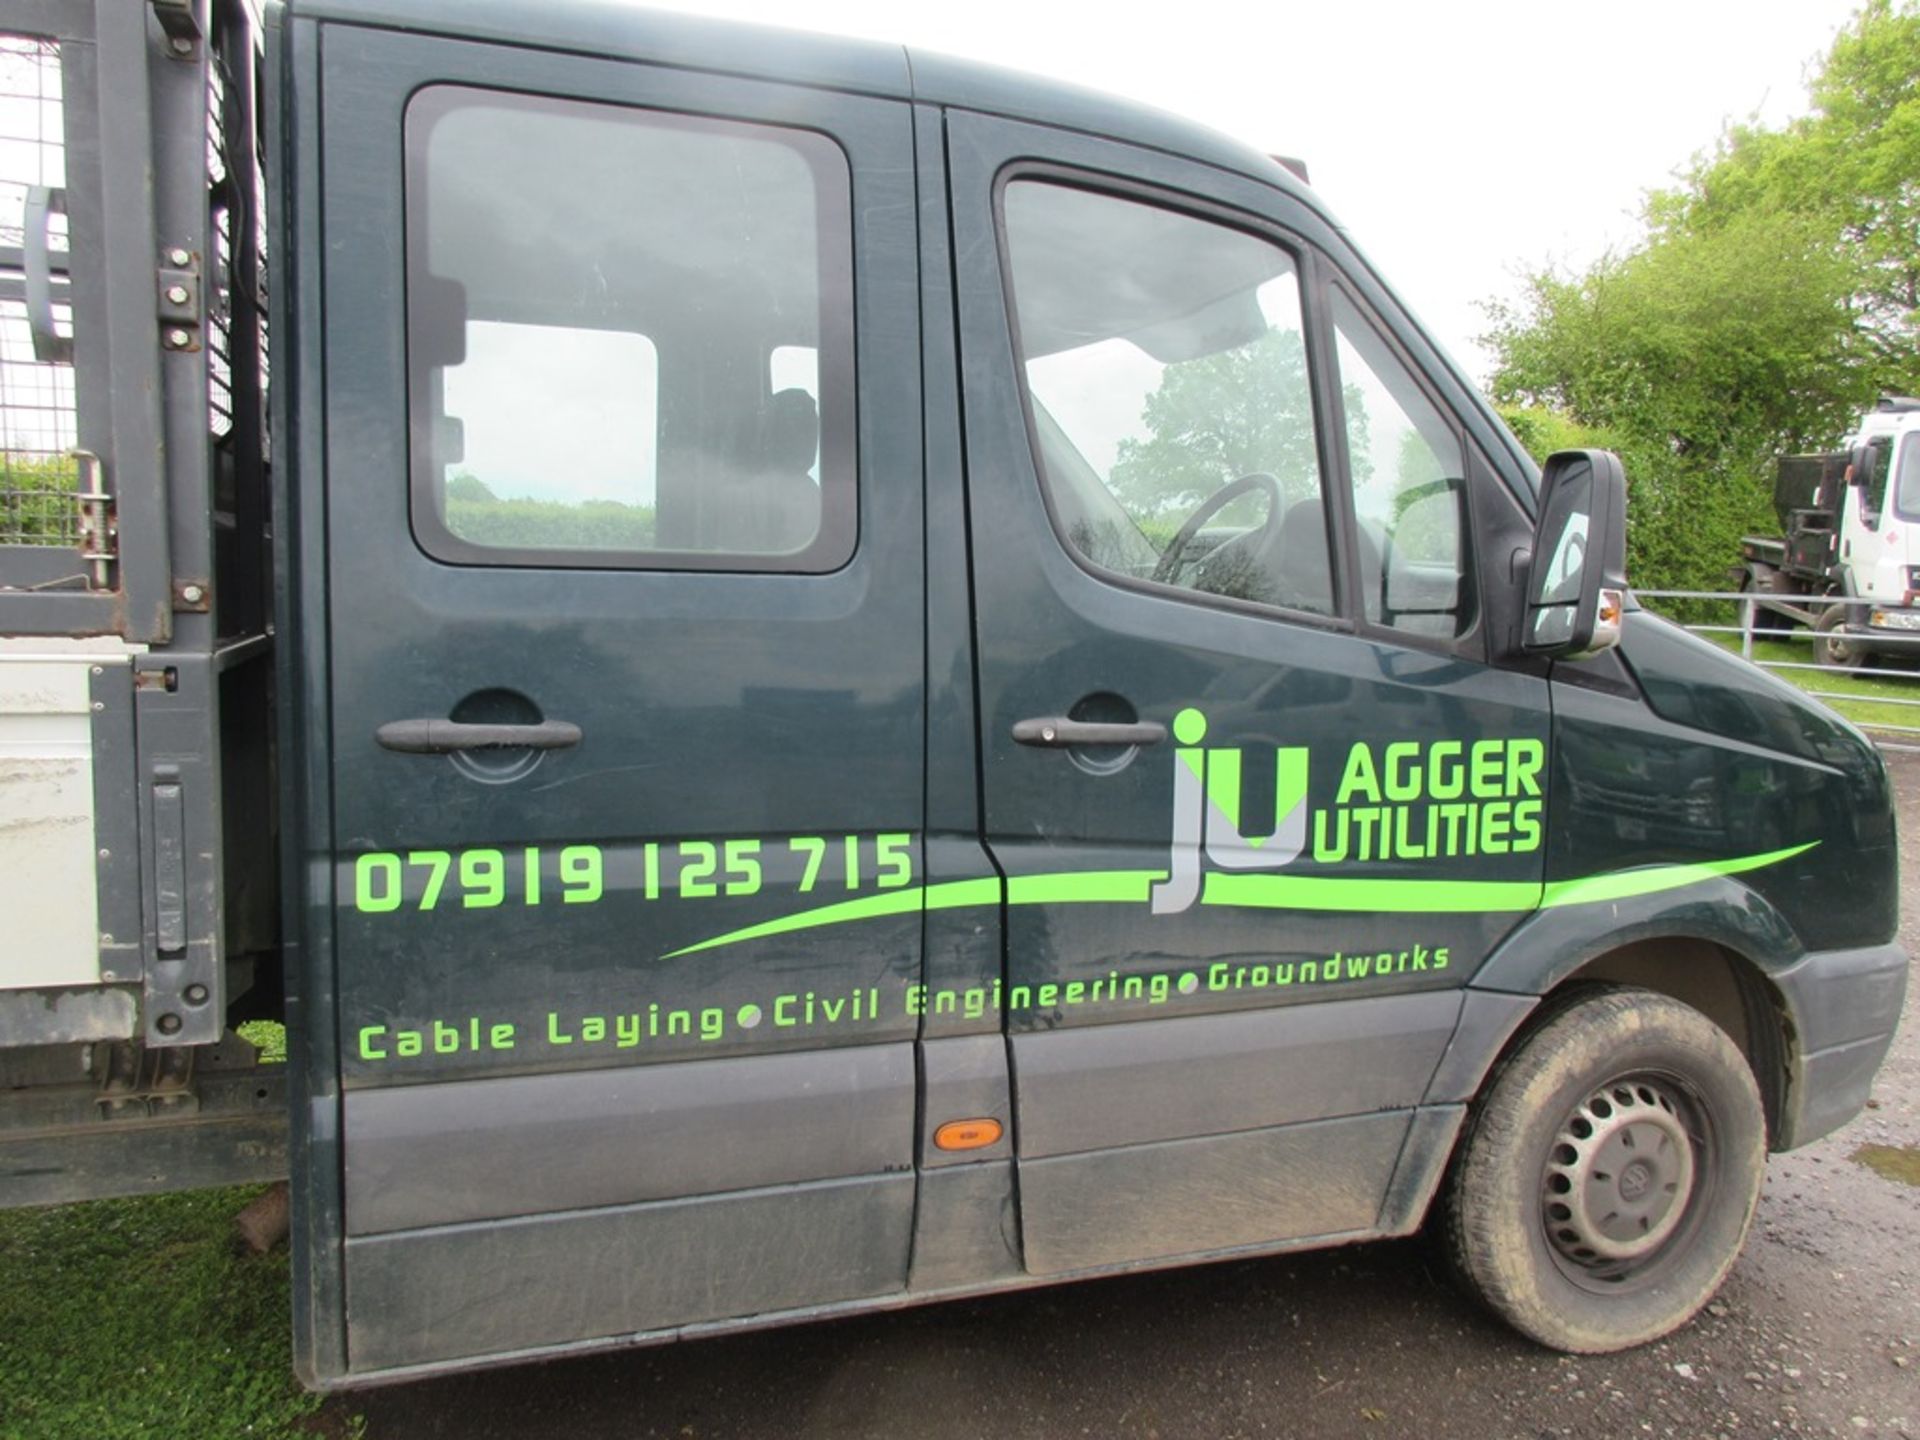 Volkswagen Crafter CR35 2.0 TDI LWB dropside, 107bhp (13/08/2015) - Image 15 of 19